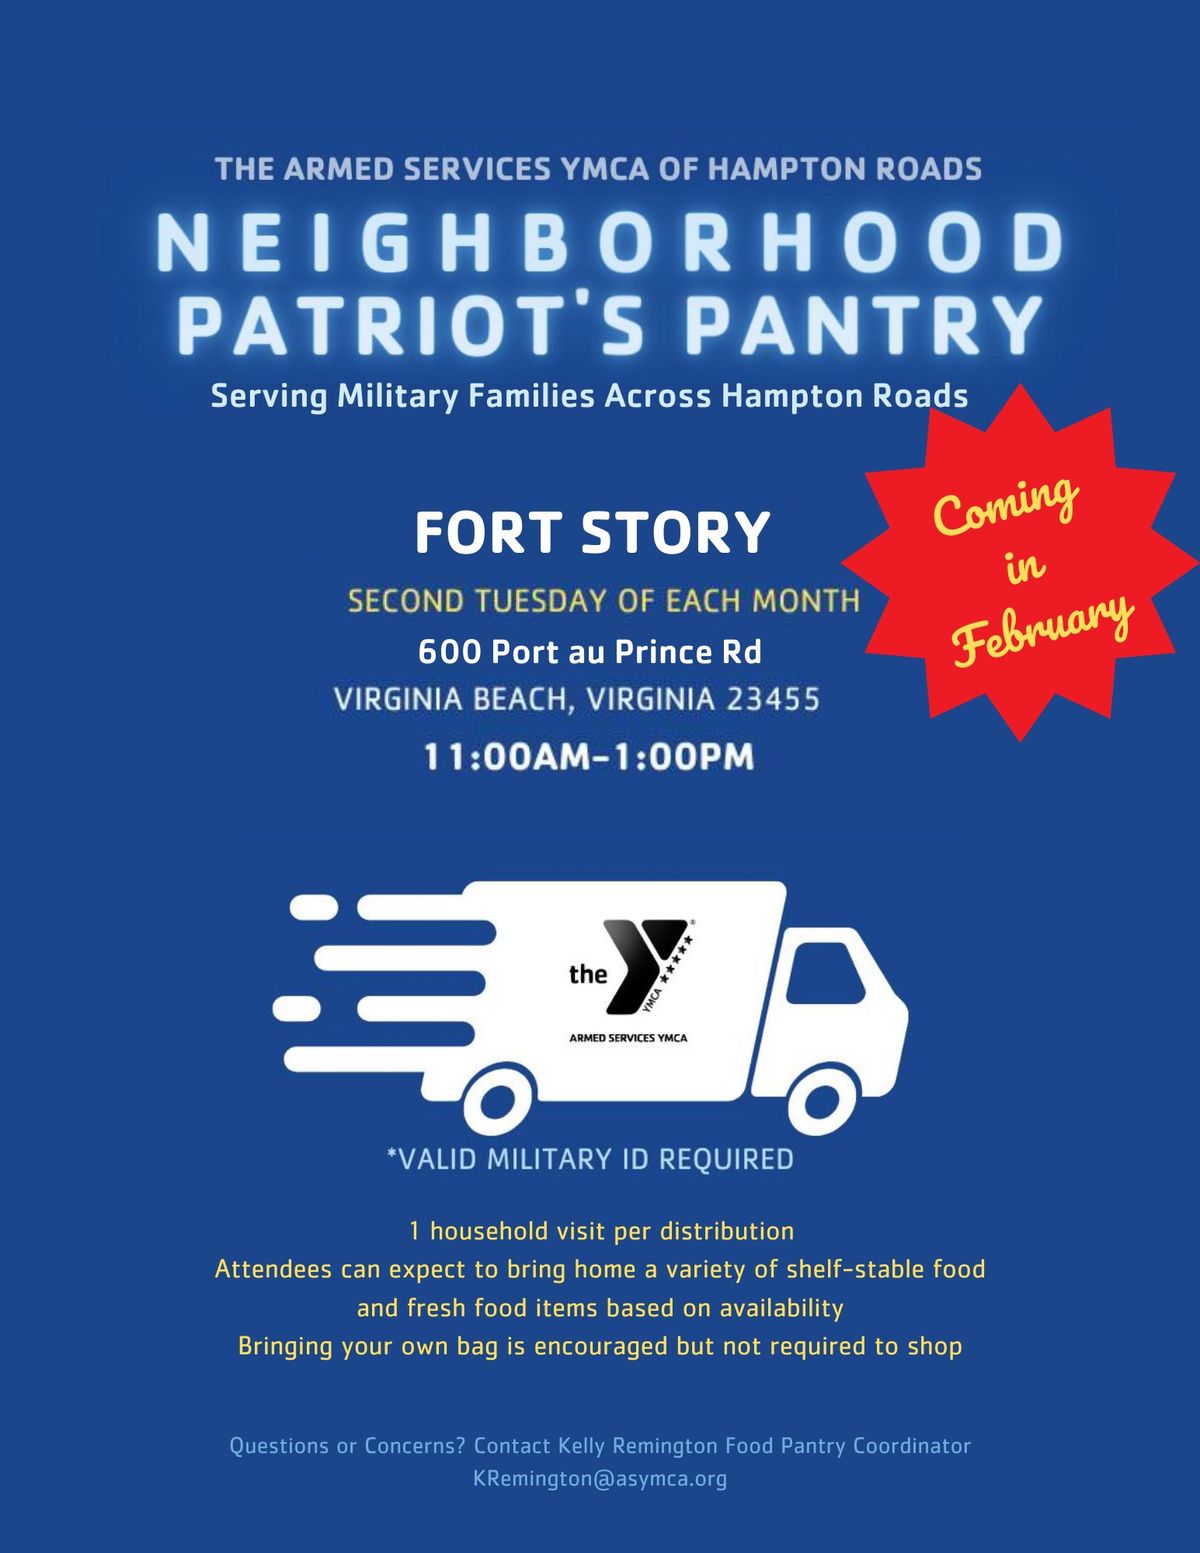 Ft.Story FREE FOOD PANTRY second Tuesdays